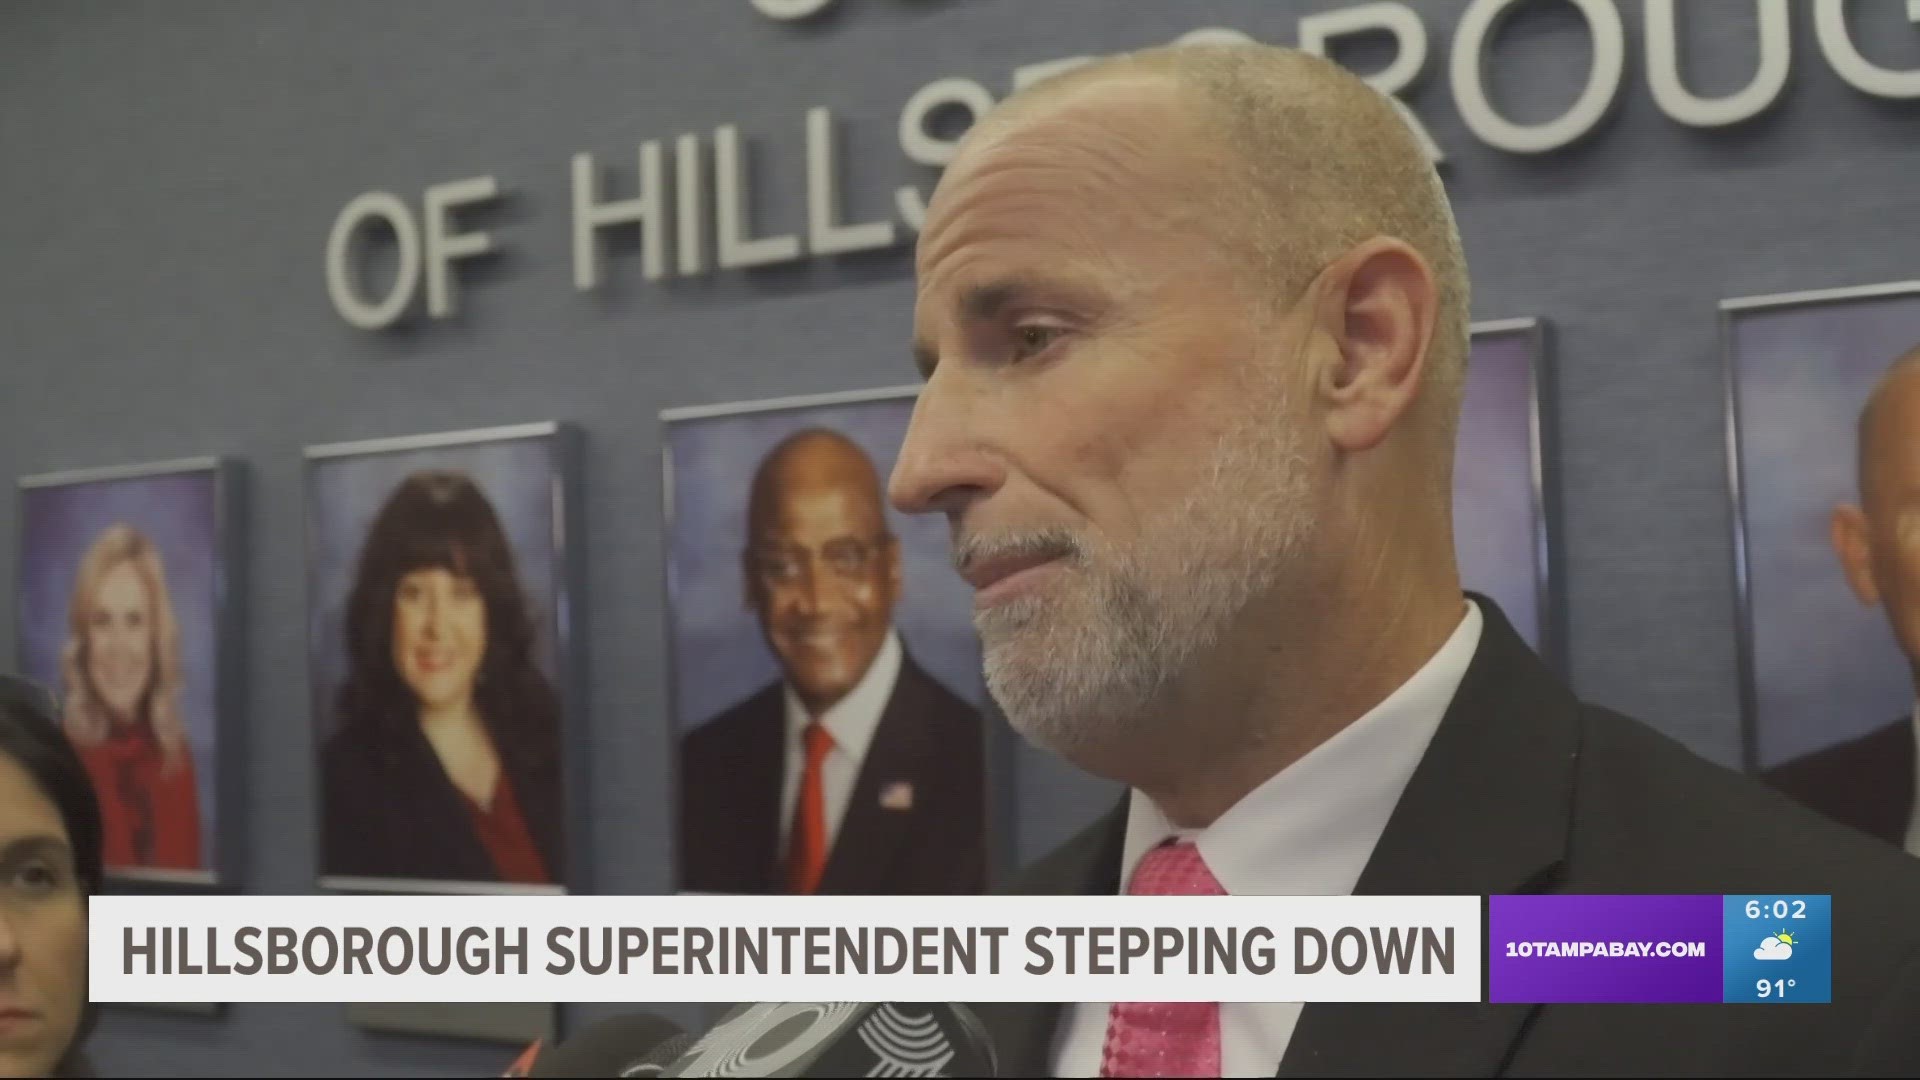 Davis told 10 Investigates he will be the Hillsborough superintendent "every single day." Five weeks later, he resigned.